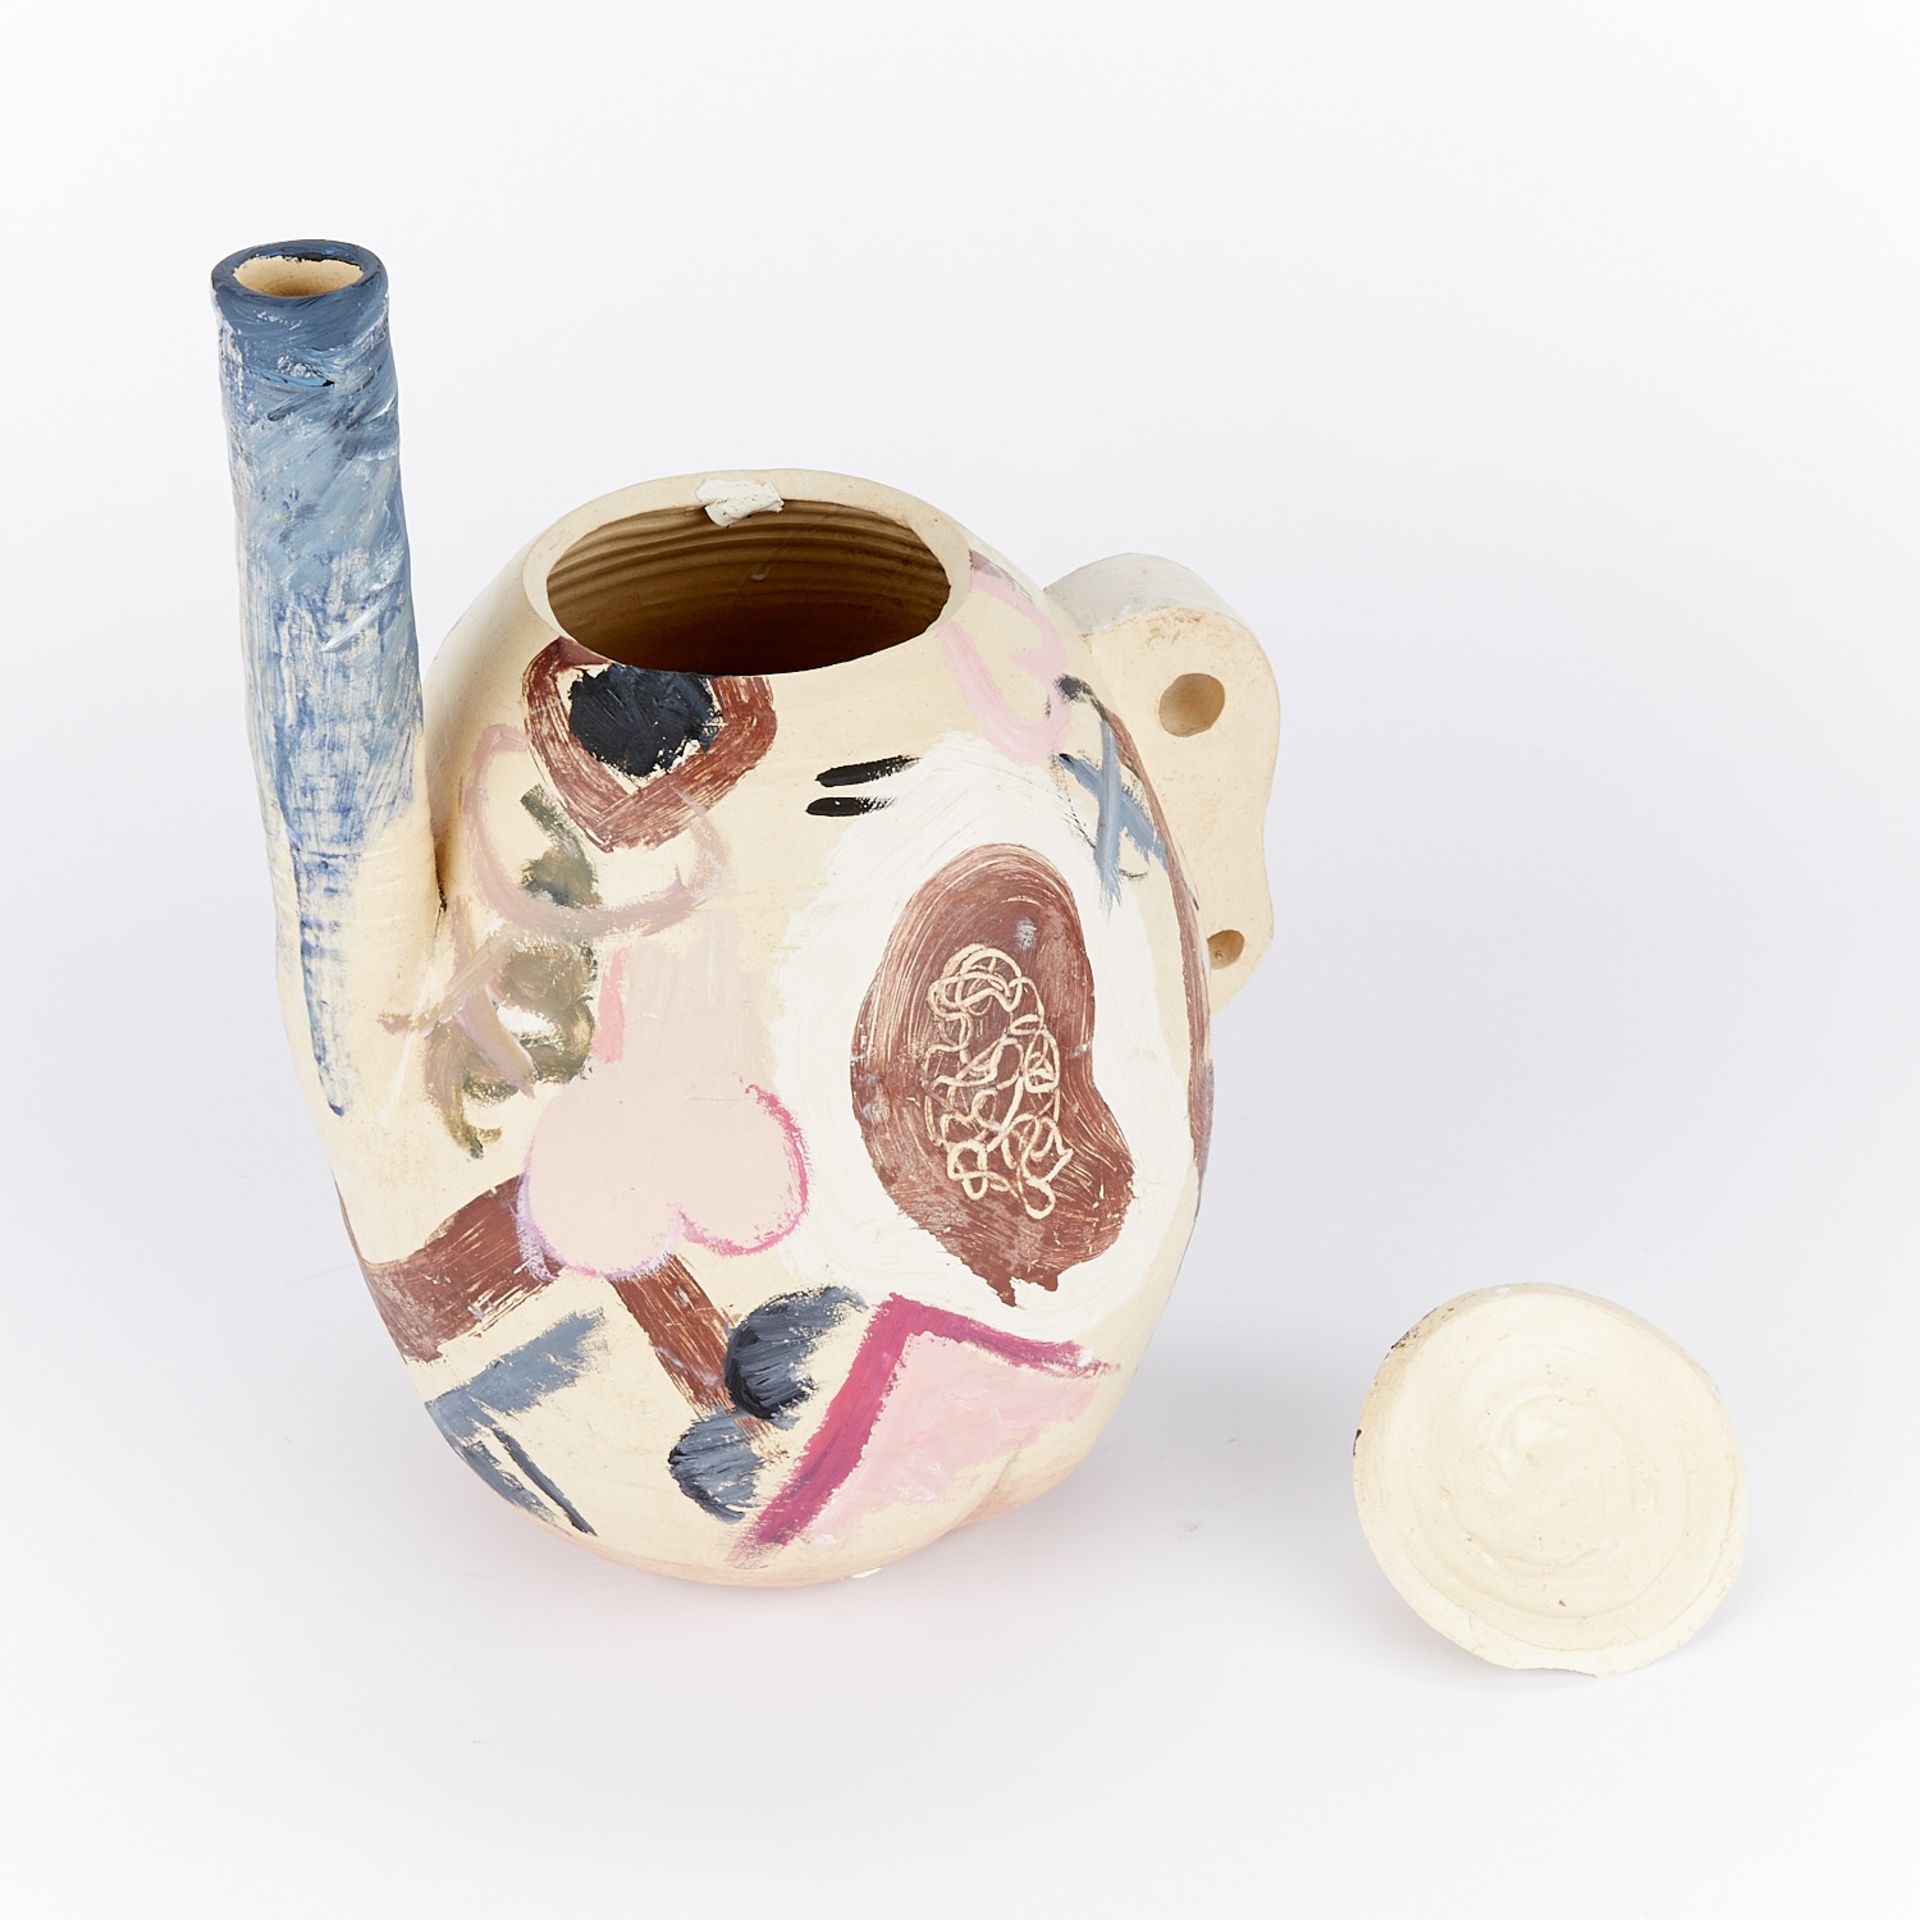 Laure Prouvost "Steaming For You" Painted Ceramic - Image 8 of 12